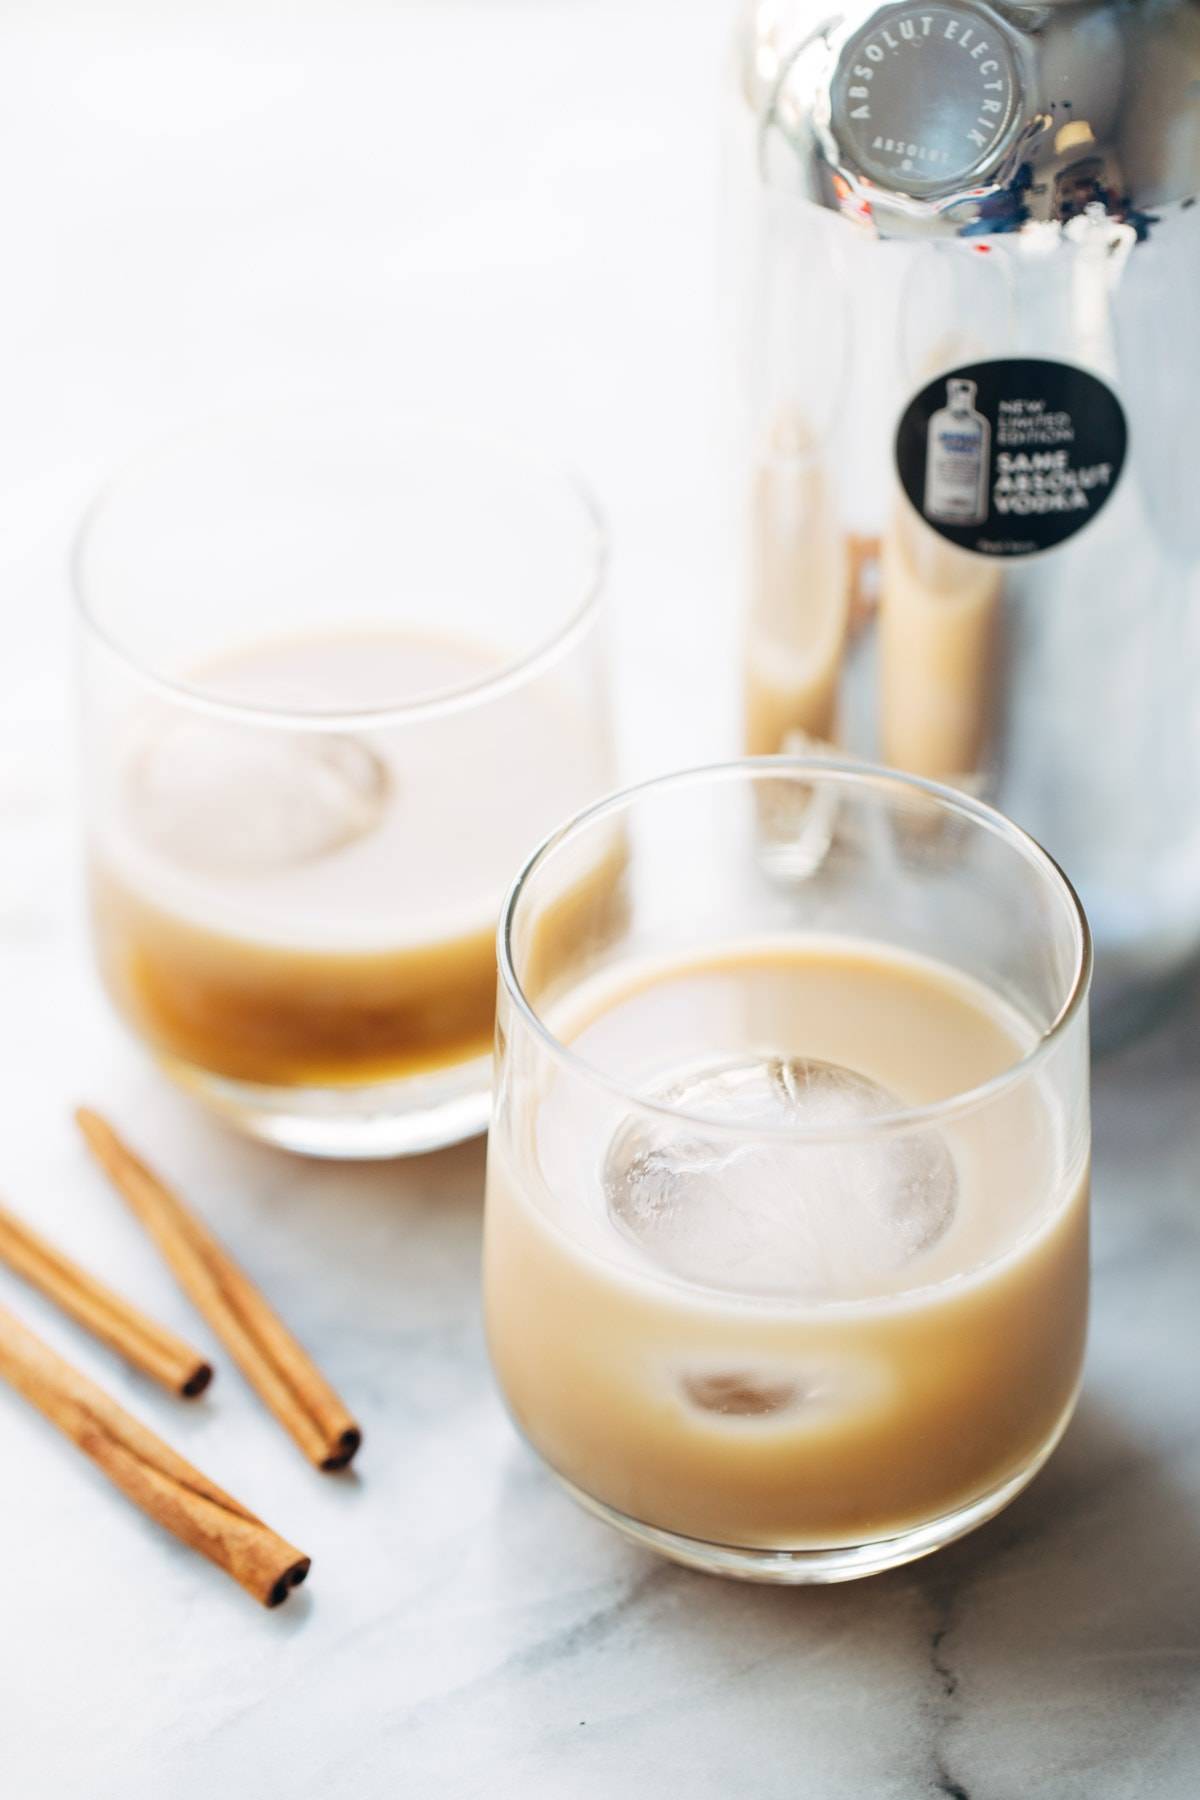 This Cinnamon White Russian is a perfect holiday party drink! with just four ingredients - vodka, coffee liquor, cinnamon simple syrup, and cream. | pinchofyum.com